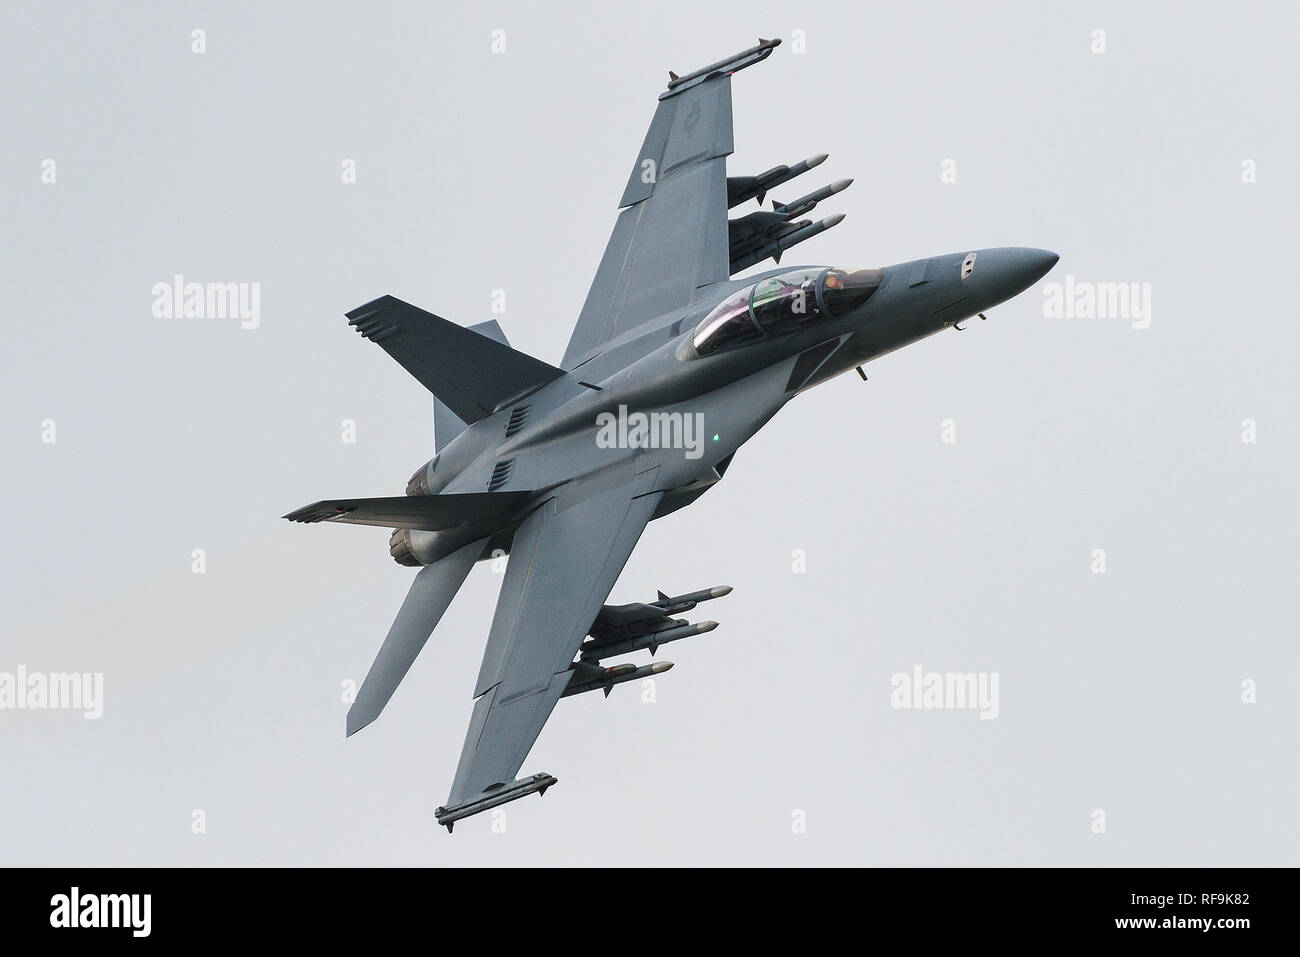 A Boeing F/A-18F Super Hornet multirole fighter jet of the United States Navy at the Royal International Air Tattoo 2016. Stock Photo